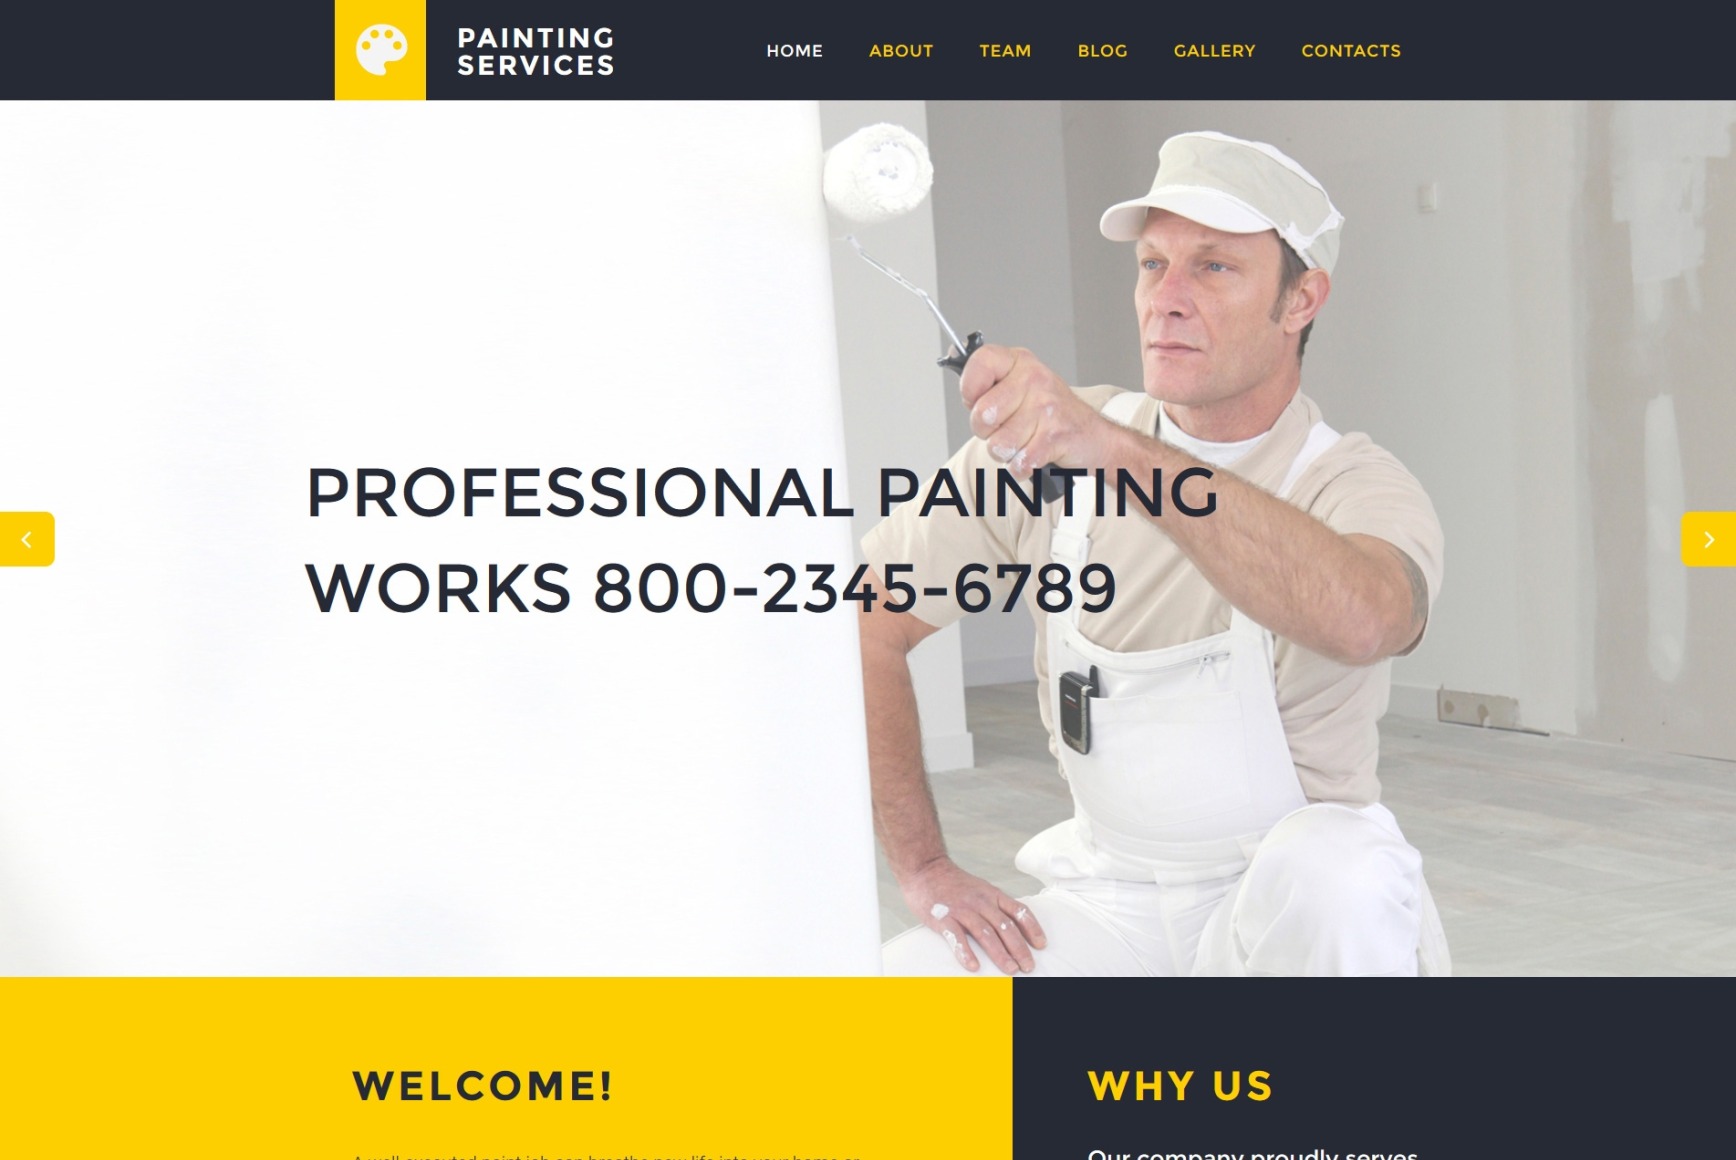 Painting Company Website Template for Painting Services - MotoCMS